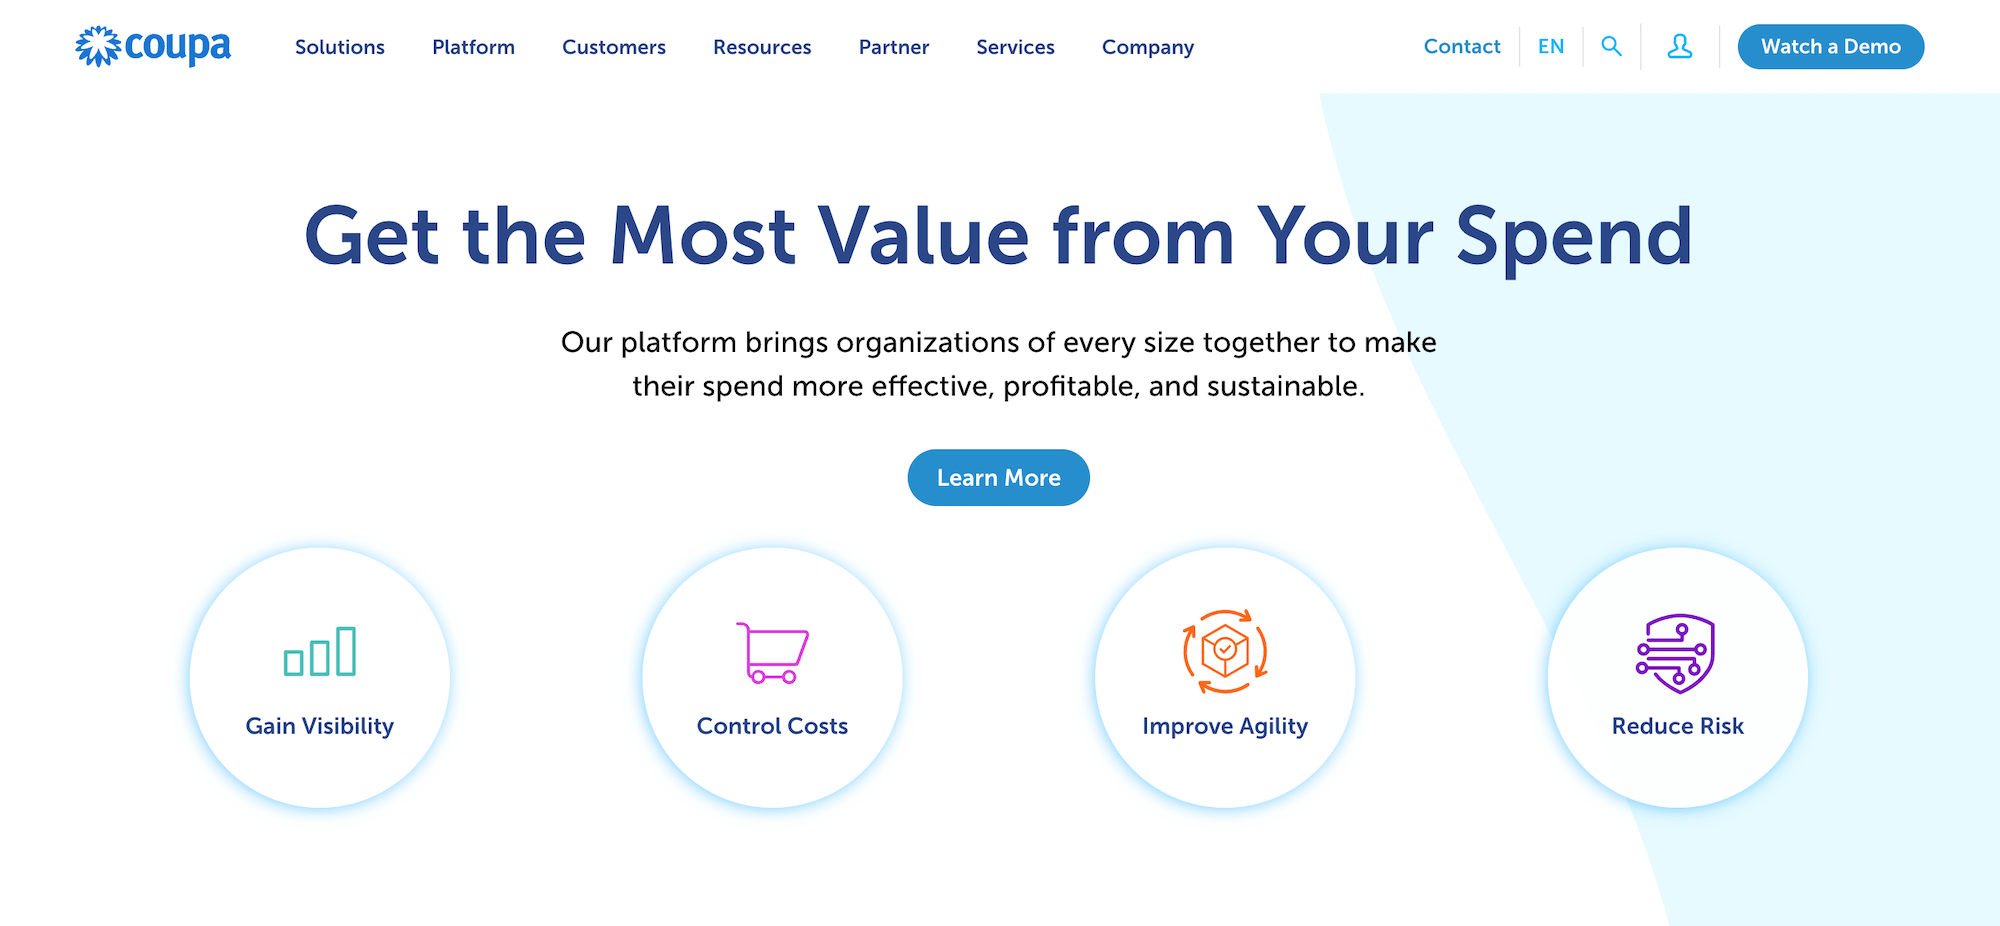 Coupa homepage: Get the most value from your spend